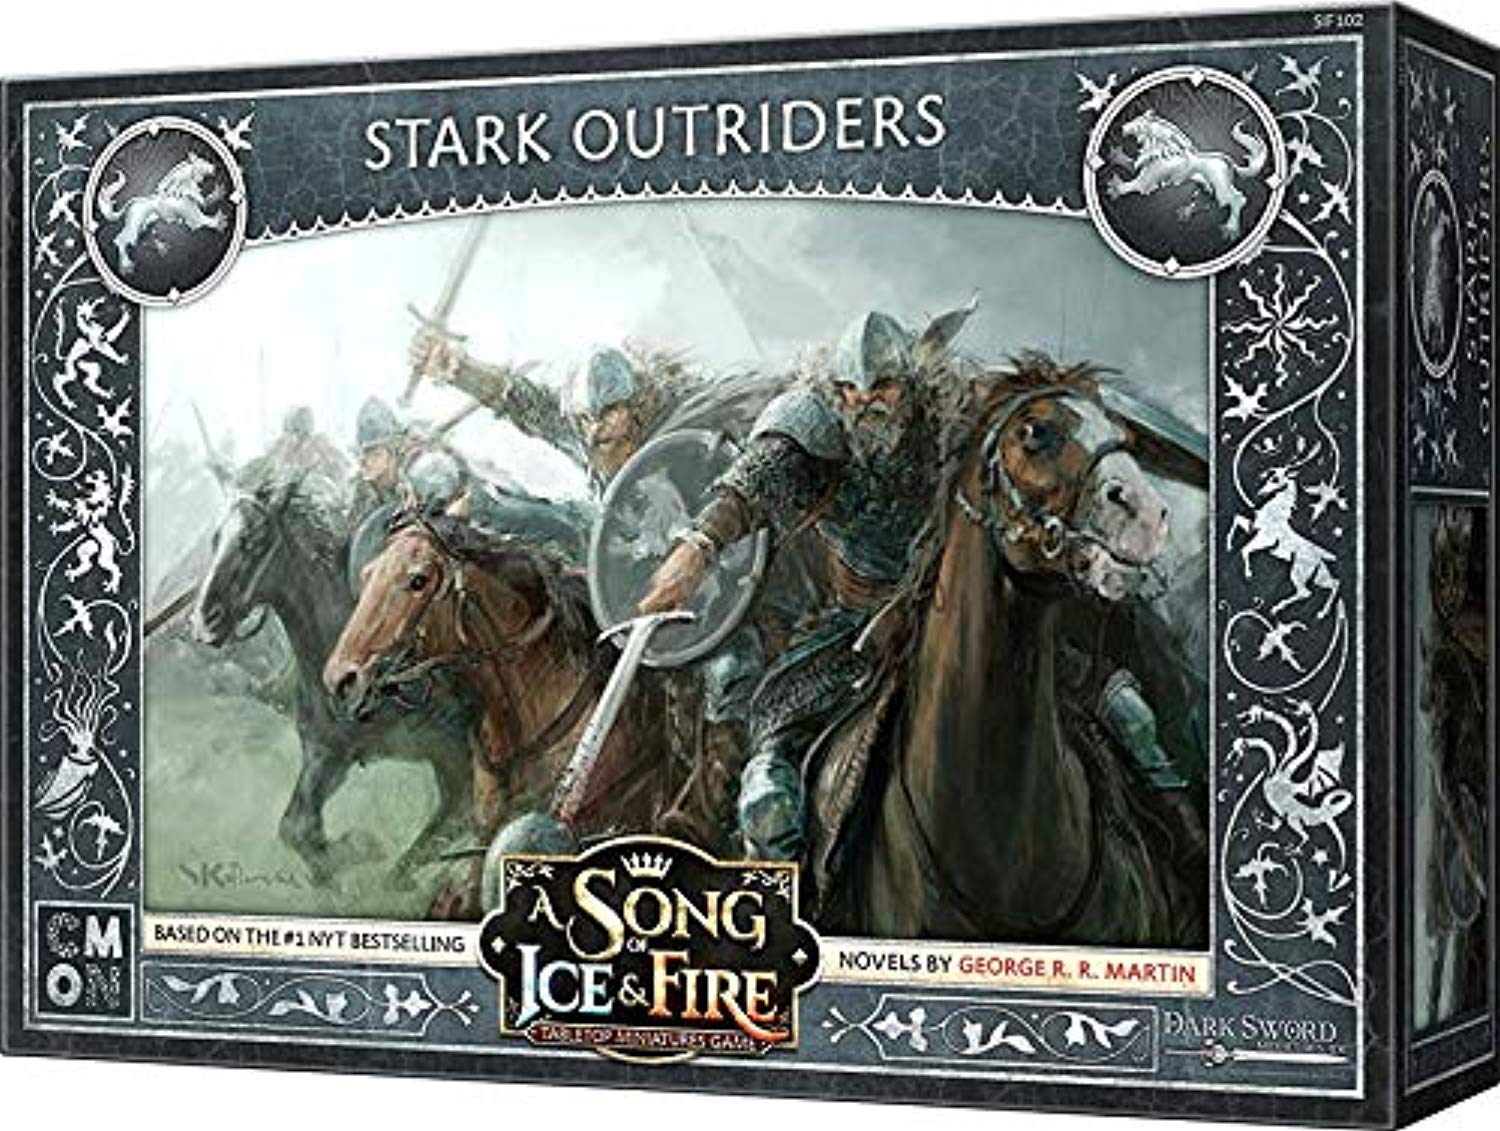 Cmon A Song of Ice & Fire: Tabletop Miniatures Game - Stark Outriders - image 2 of 2